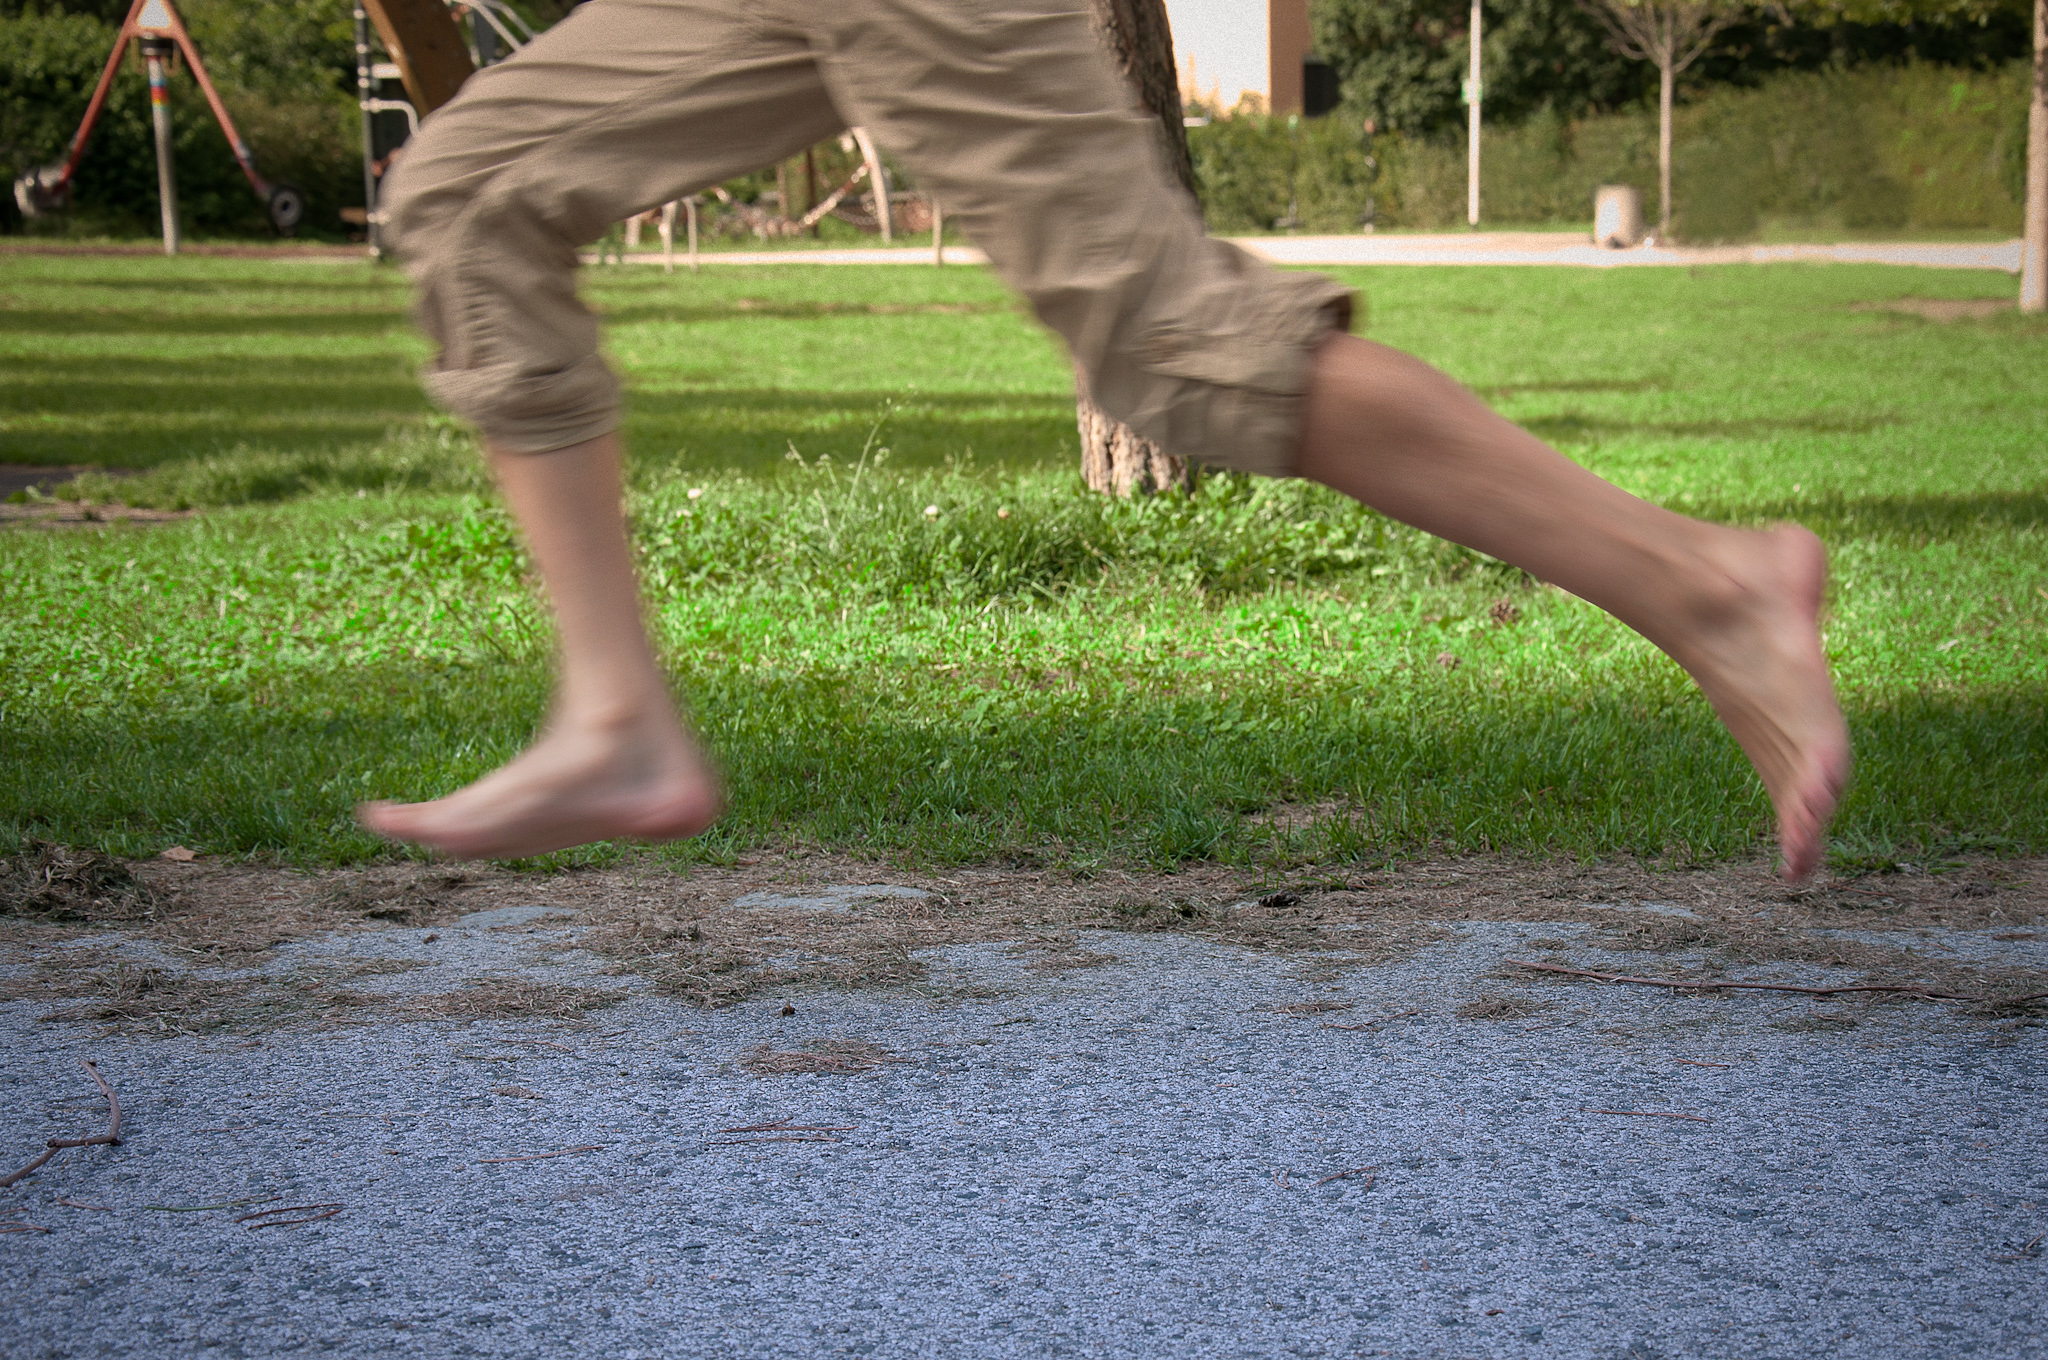 the feet of a man running while playing with a white frisbee